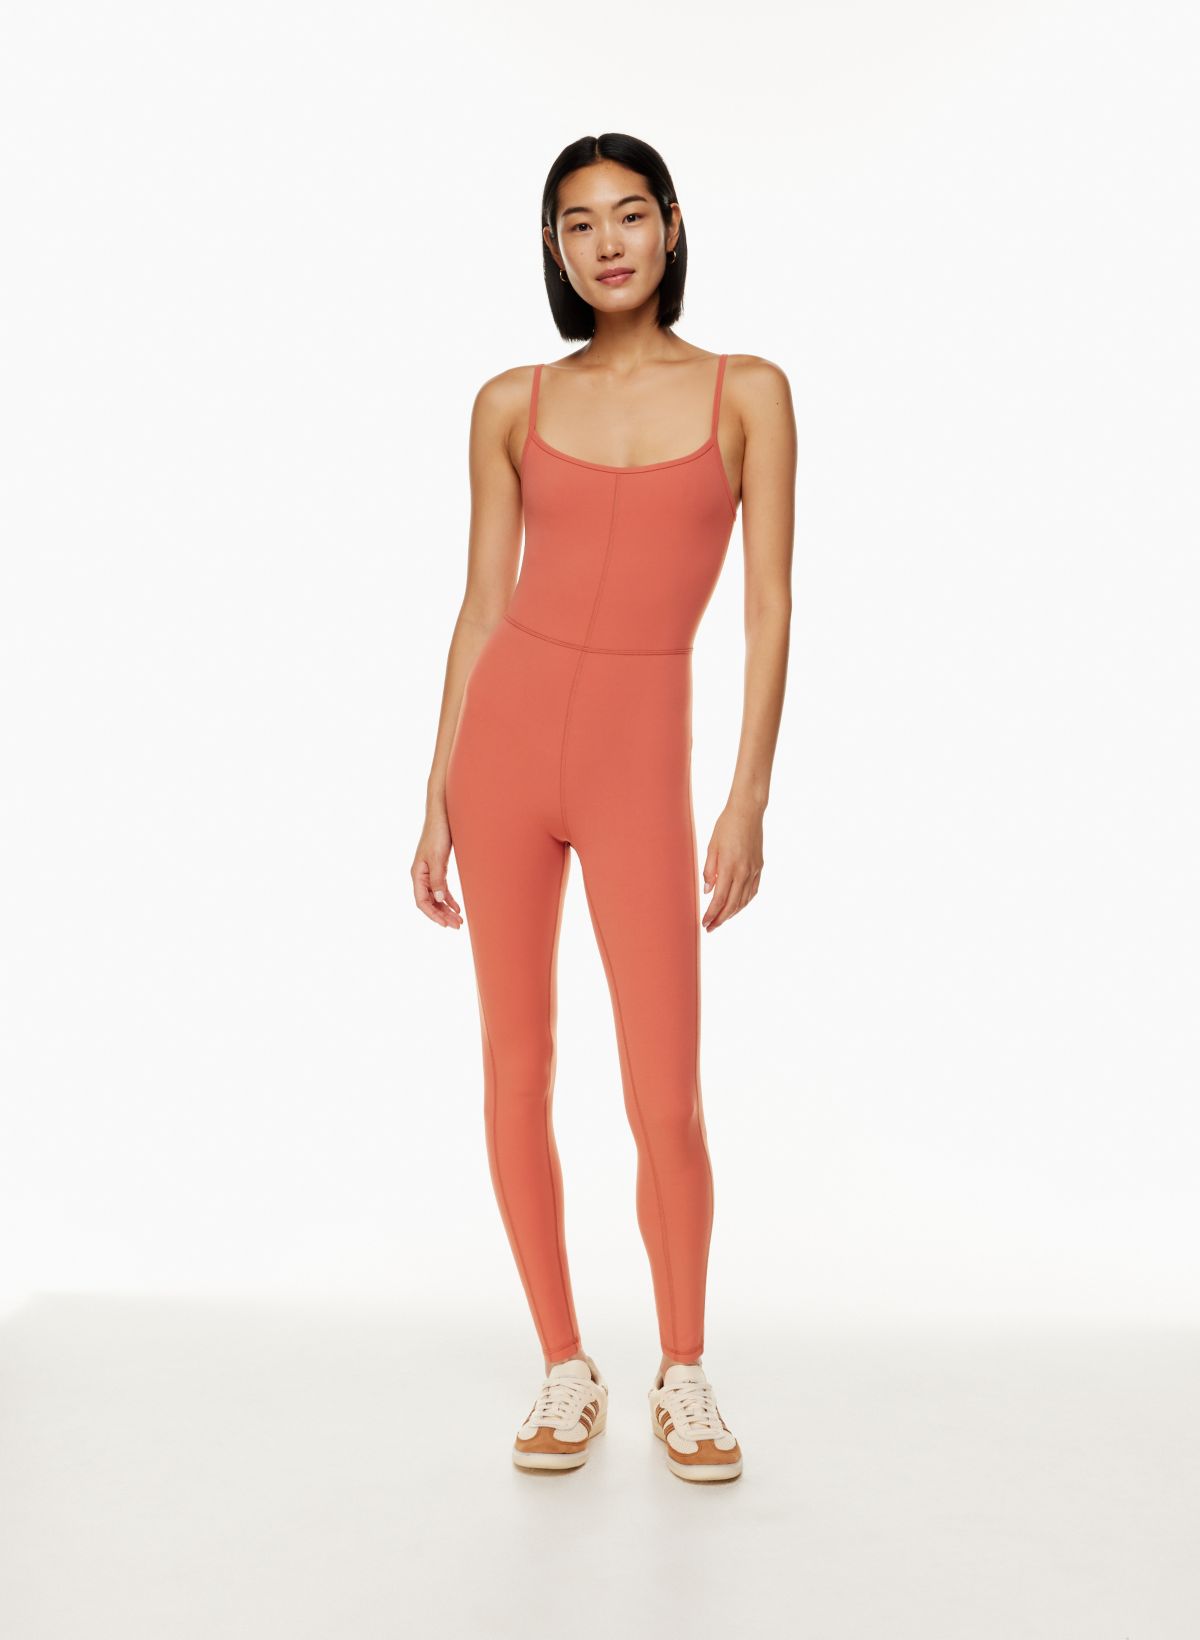 Wilfred, Pants & Jumpsuits, Wilfred Free Divinity Flare Jumpsuit